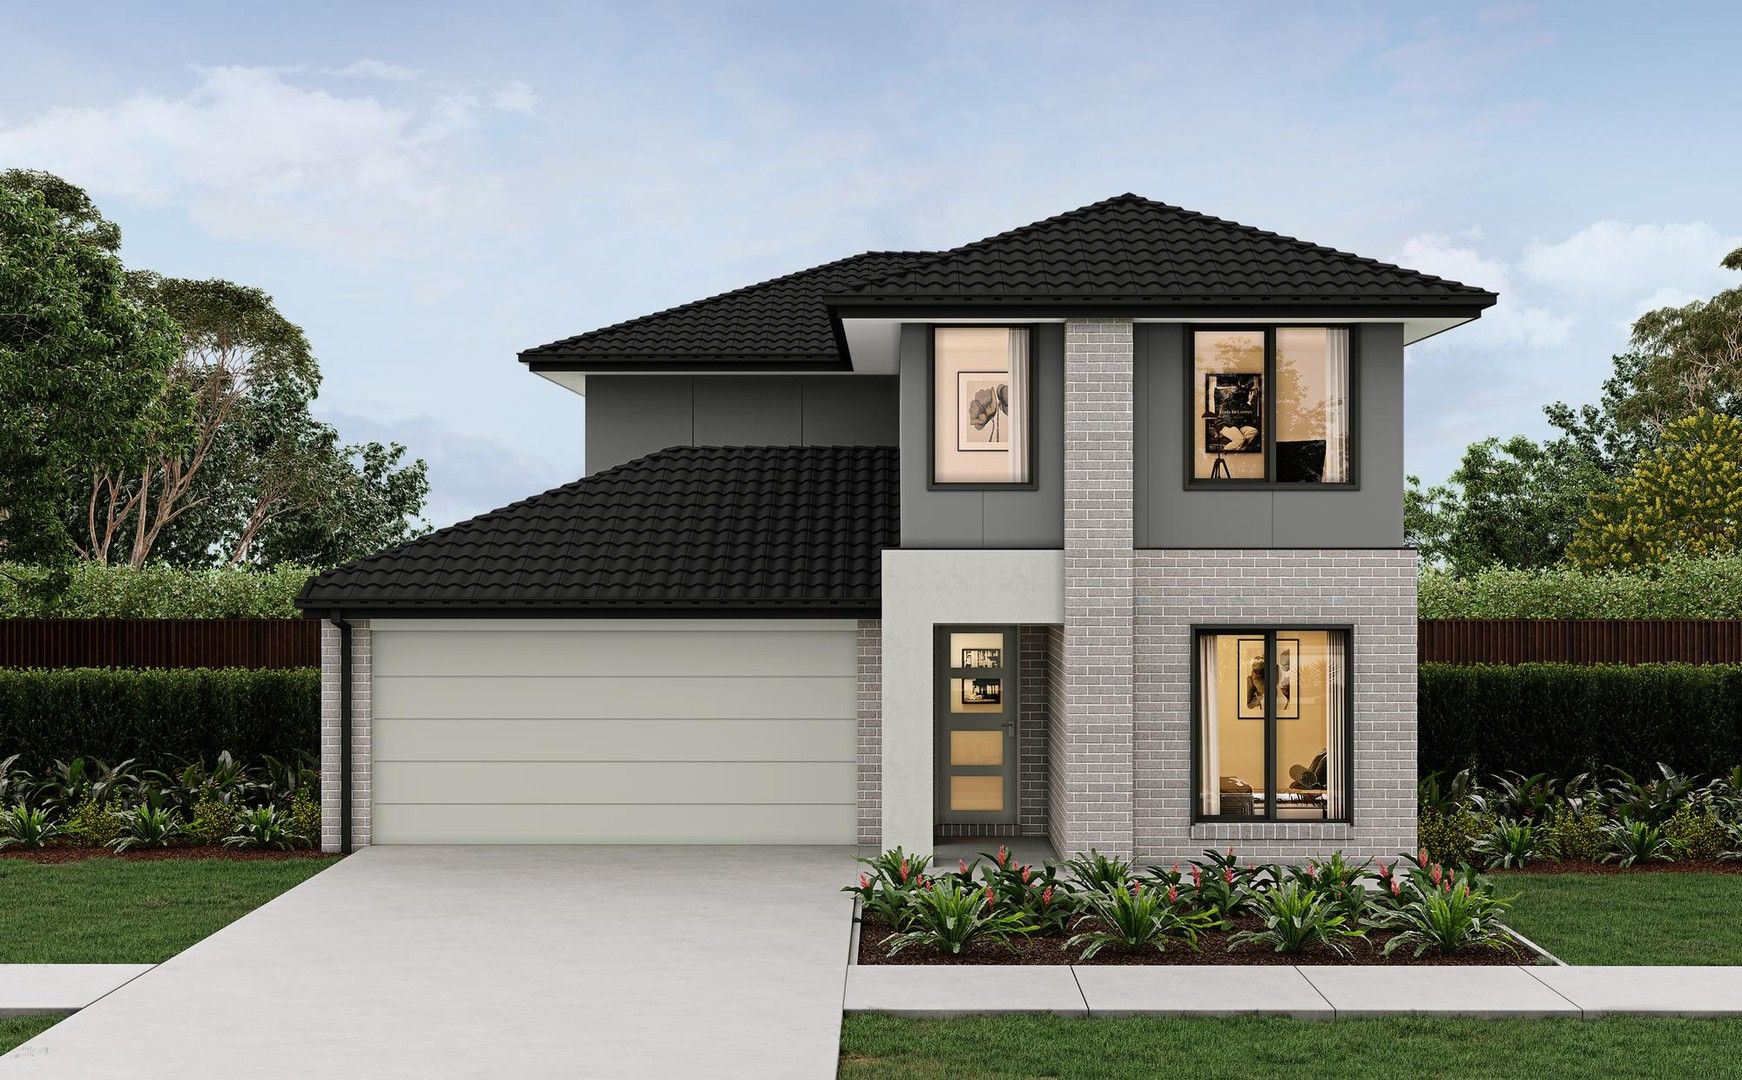 3 bedrooms New House & Land in 3650 Aspire Estate FRASER RISE VIC, 3336